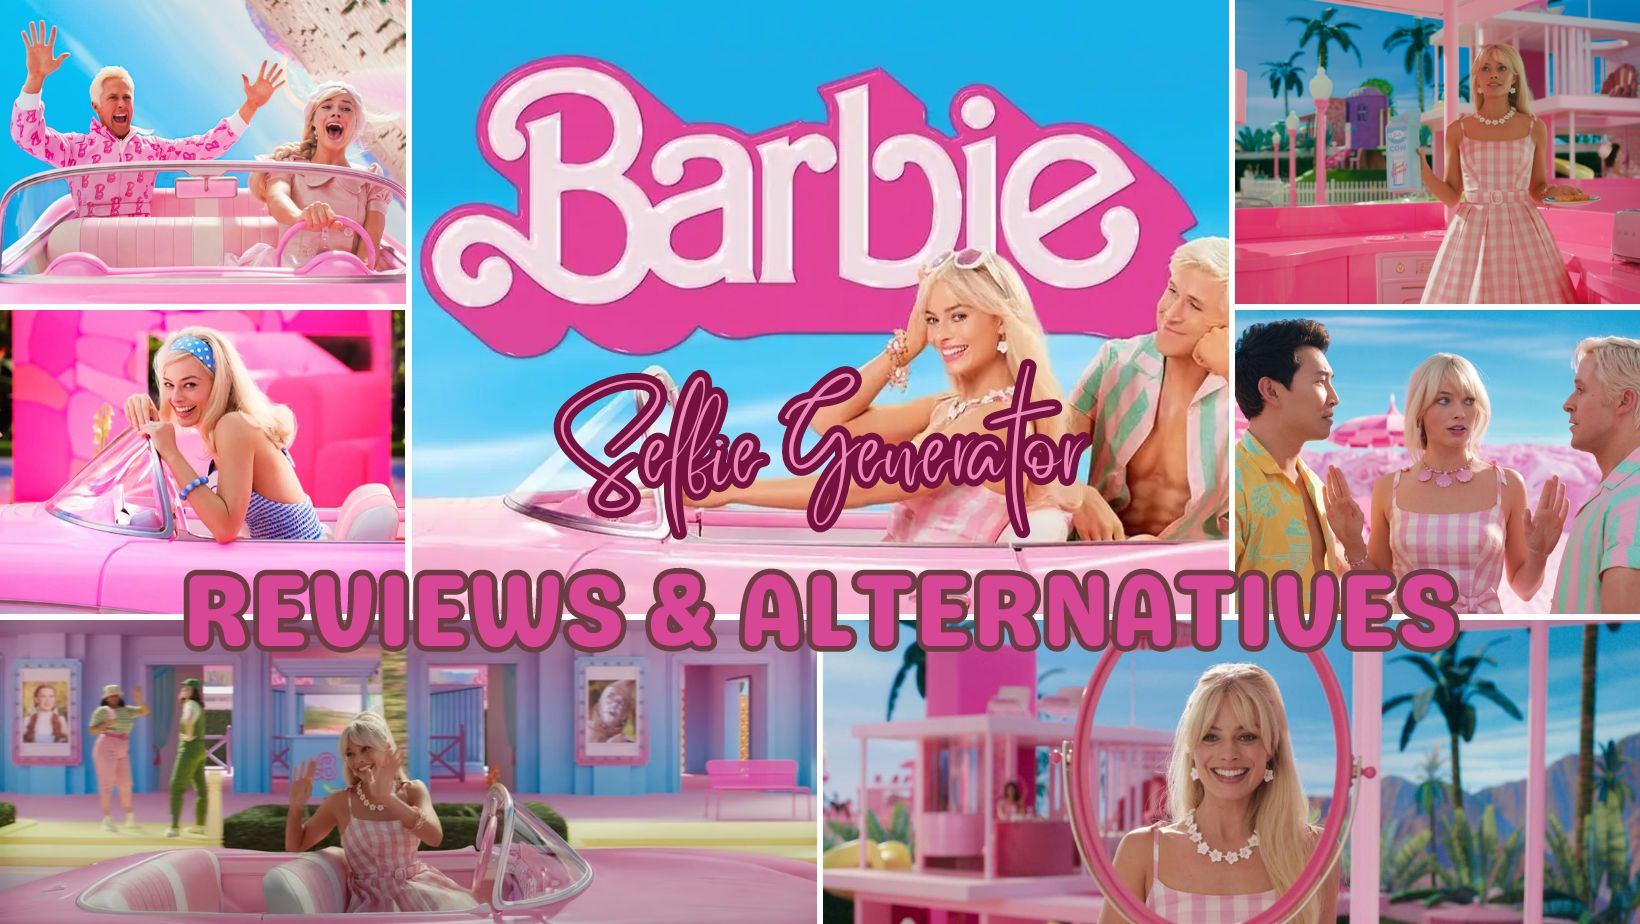 Barbie Selfie Generator: Review and Discover the Best Alternatives